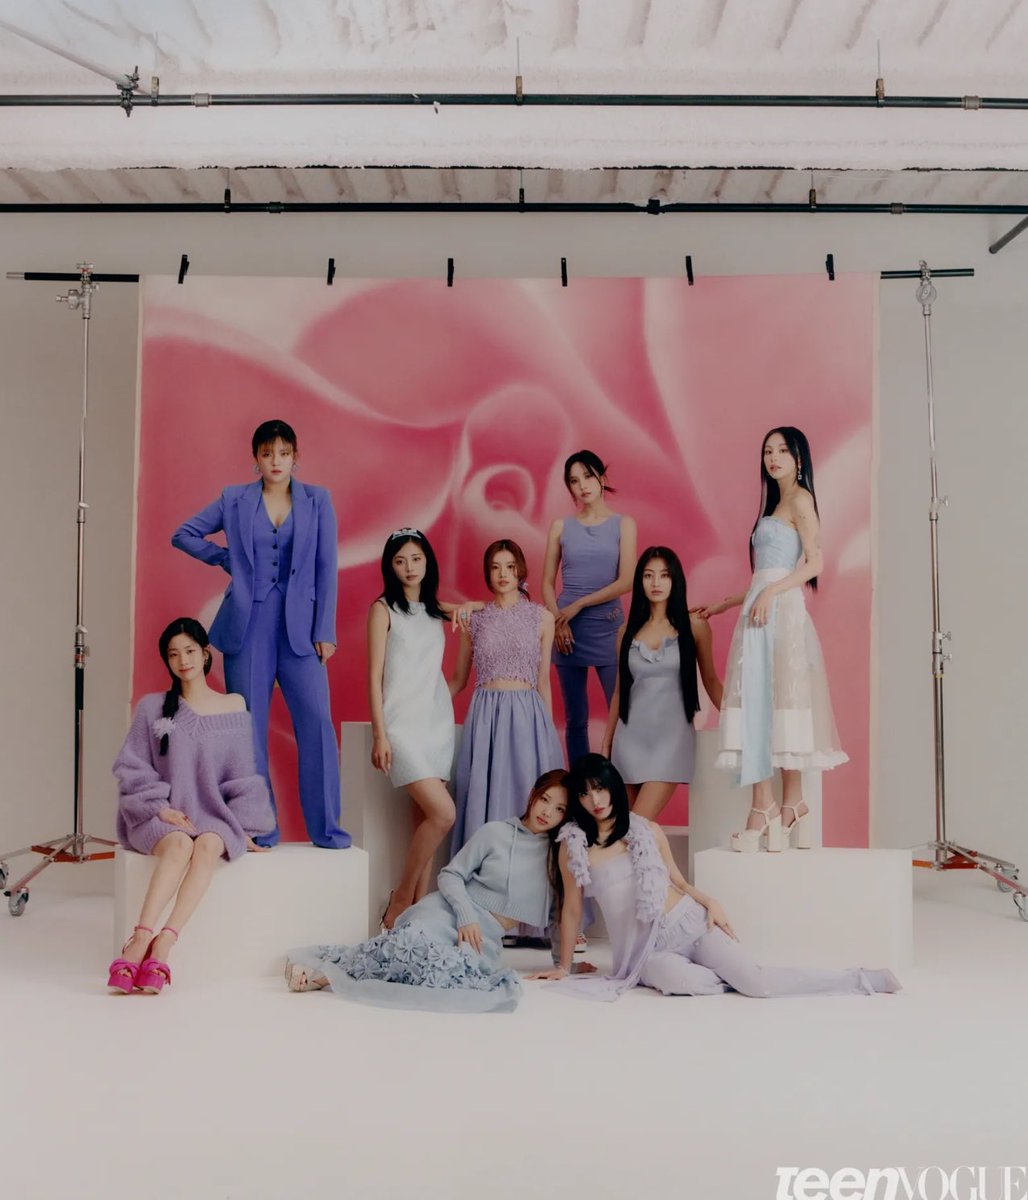 .@TeenVogue on @JYPETWICE reaching newer heights together as a group: — “[TWICE] have become known colloquially as “the Nation’s Girl Group,” a title that has historically referred to the legendary second-gen act Girls Generation (SNSD)” - L. Frances 🩷